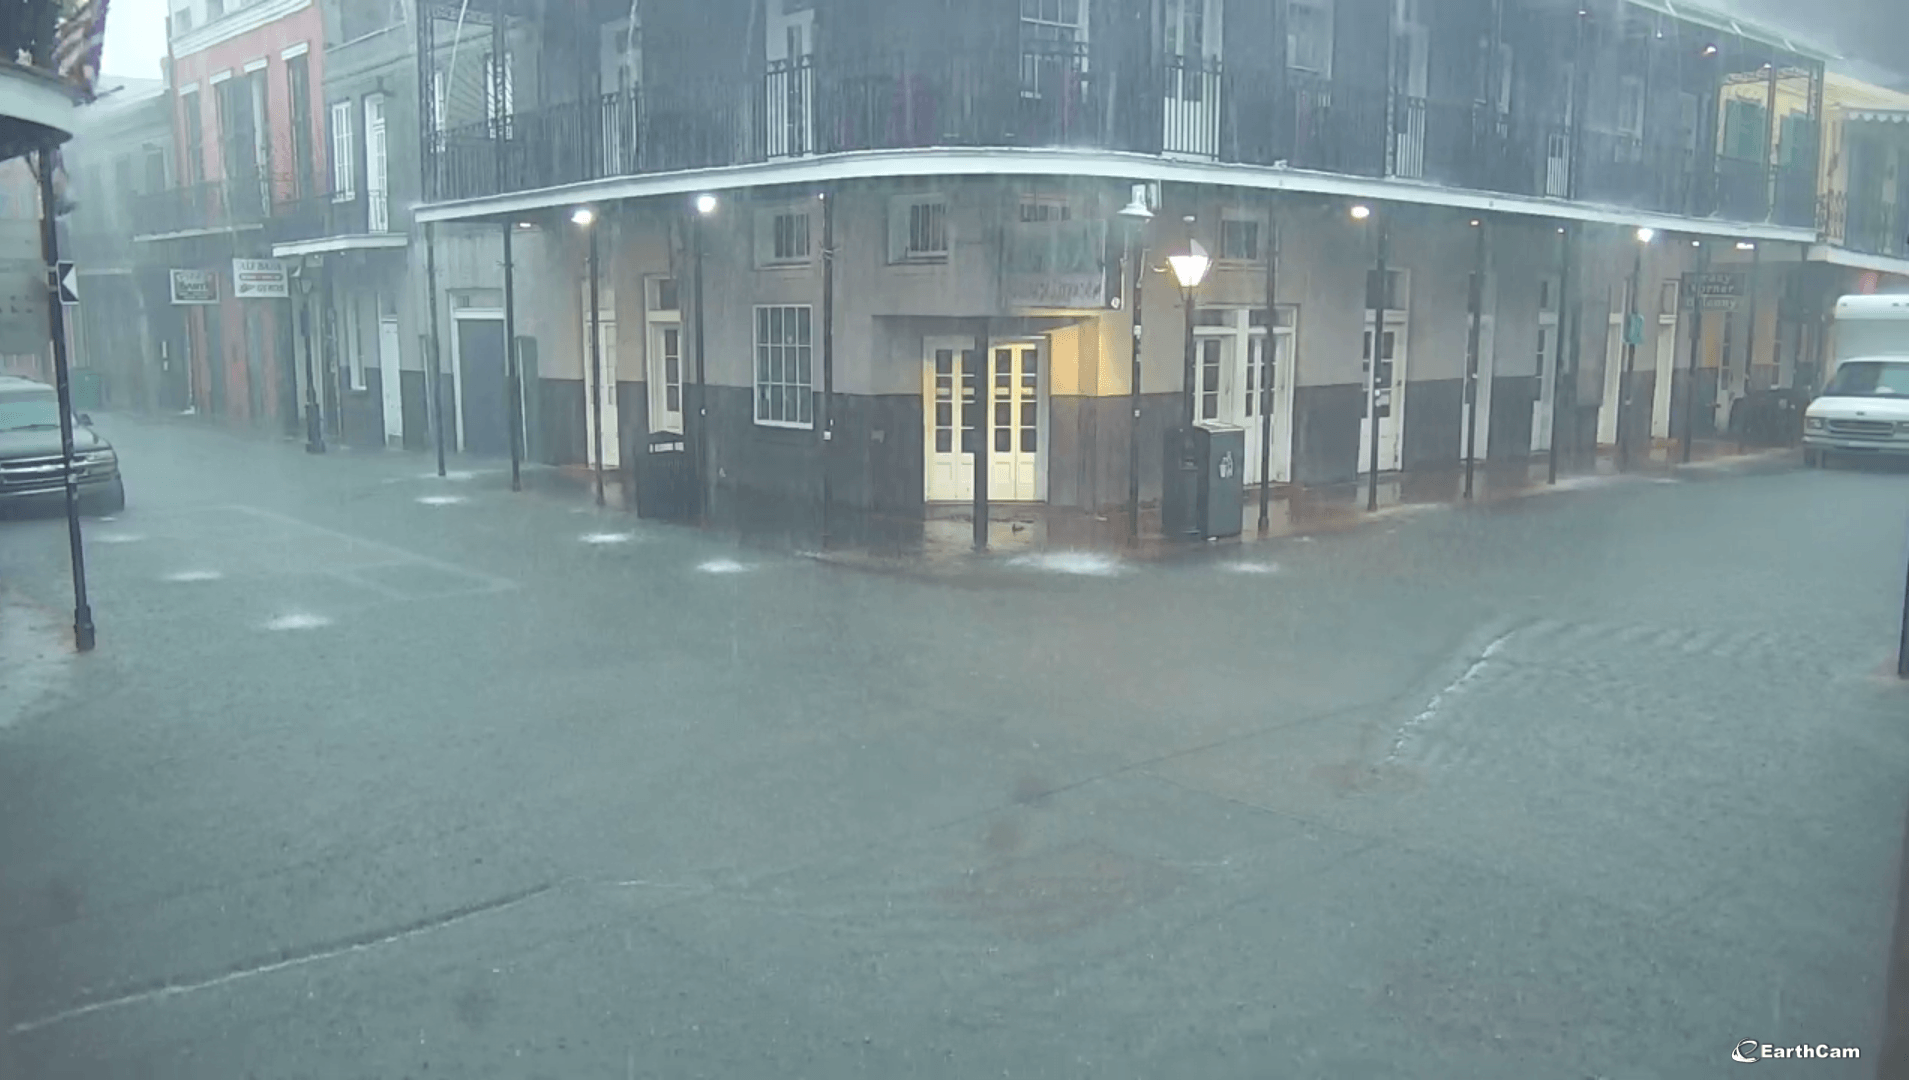 Severe Storms Triggered Flooding In New Orleans As Possible Hurricane Looms